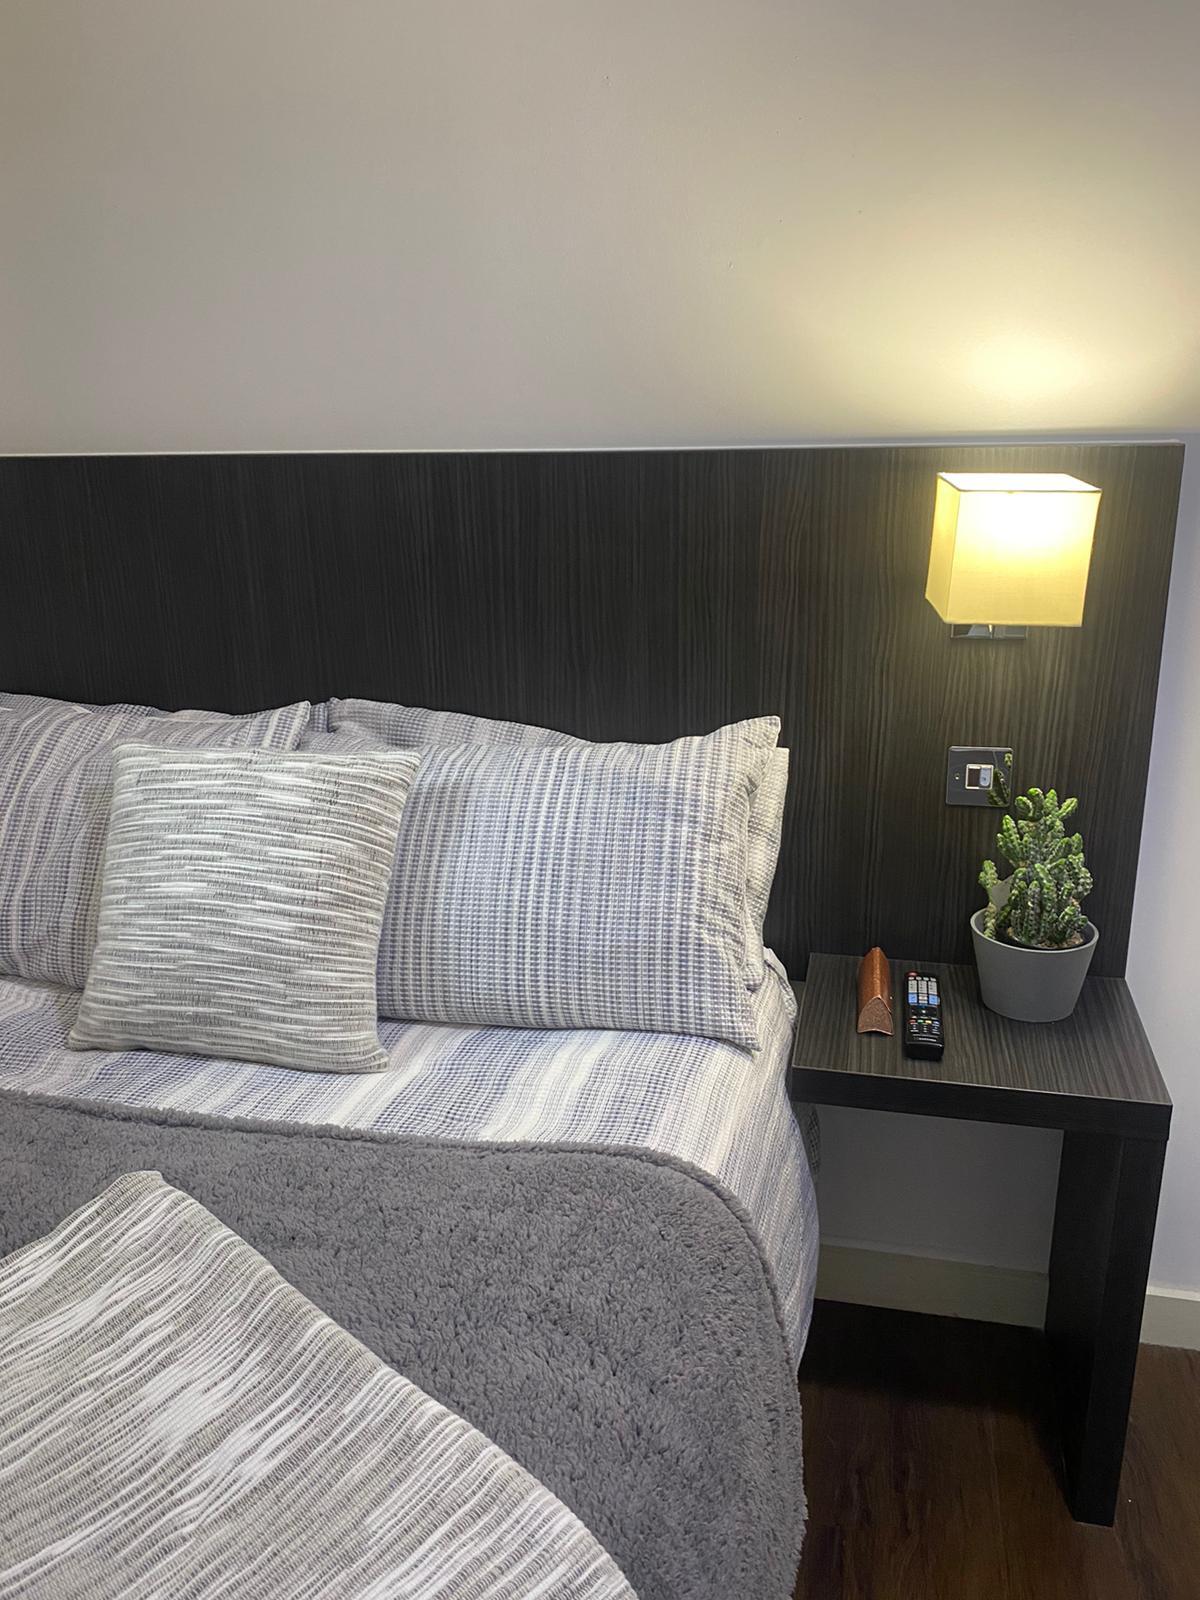 Bed The Bridewell - Caro Lettings